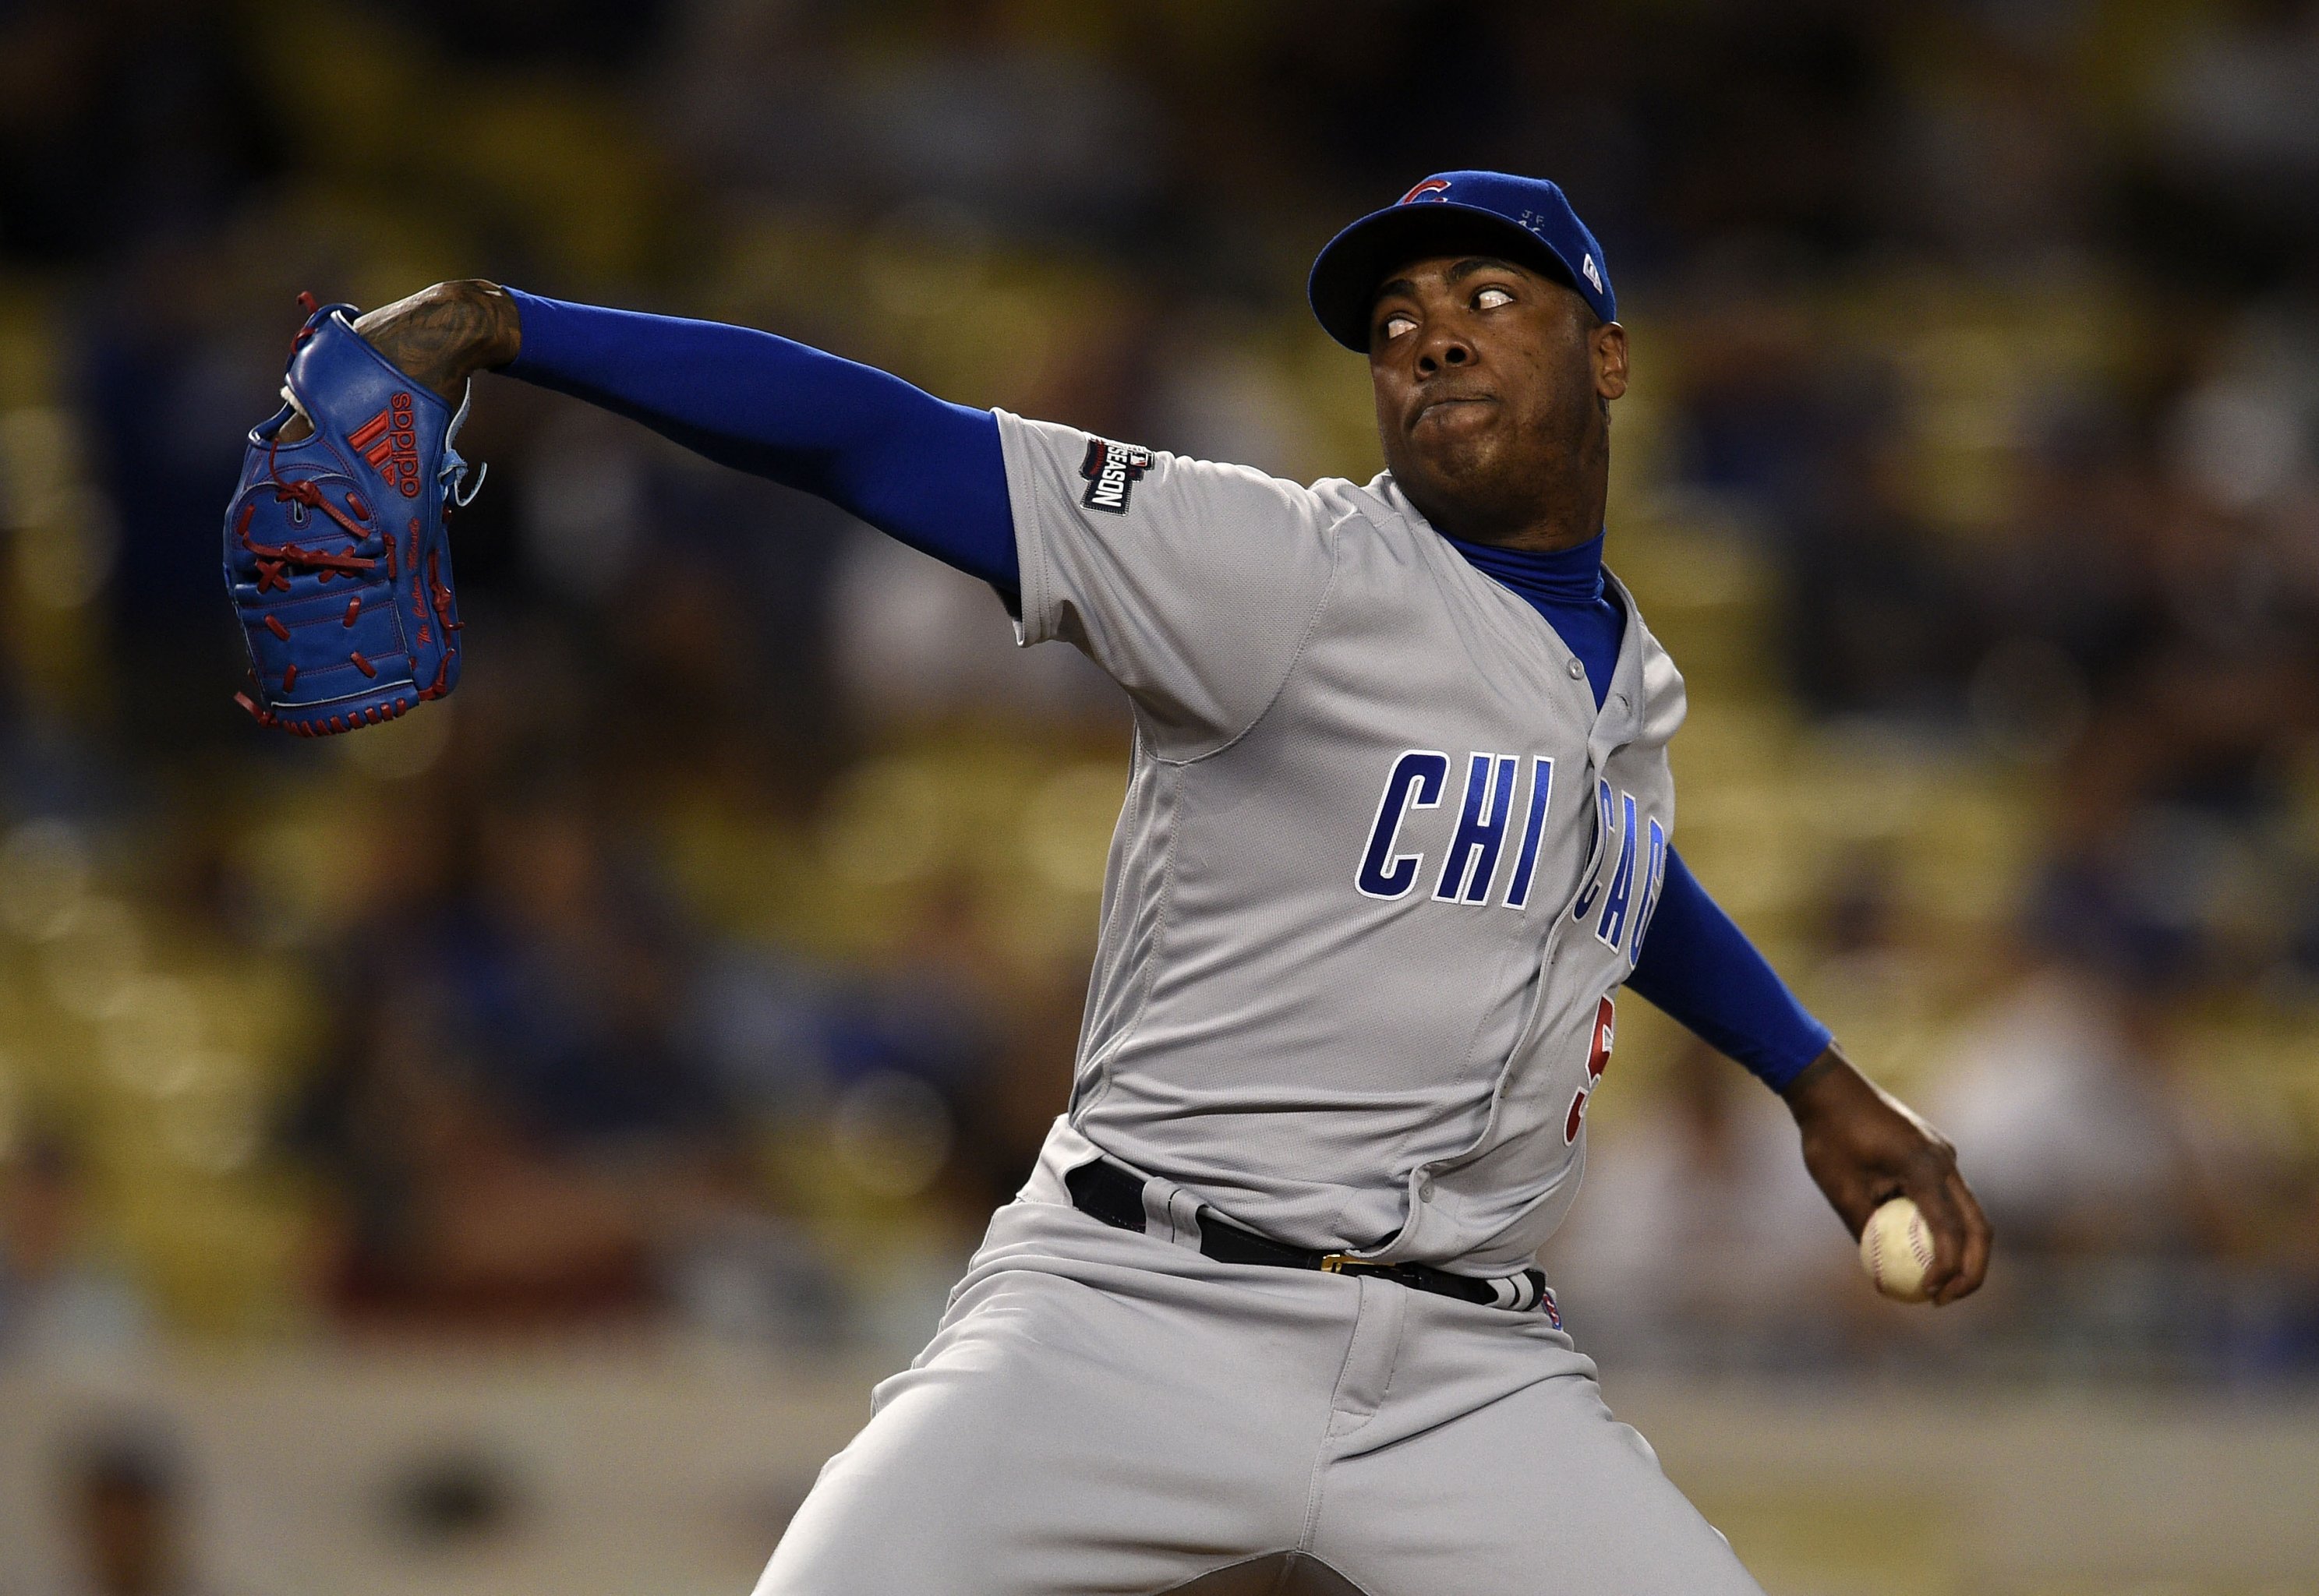 MLB Network - July 25, 2016 - The eventual World Series champion Chicago  Cubs make a splash by acquiring Aroldis Chapman from the New York Yankees.